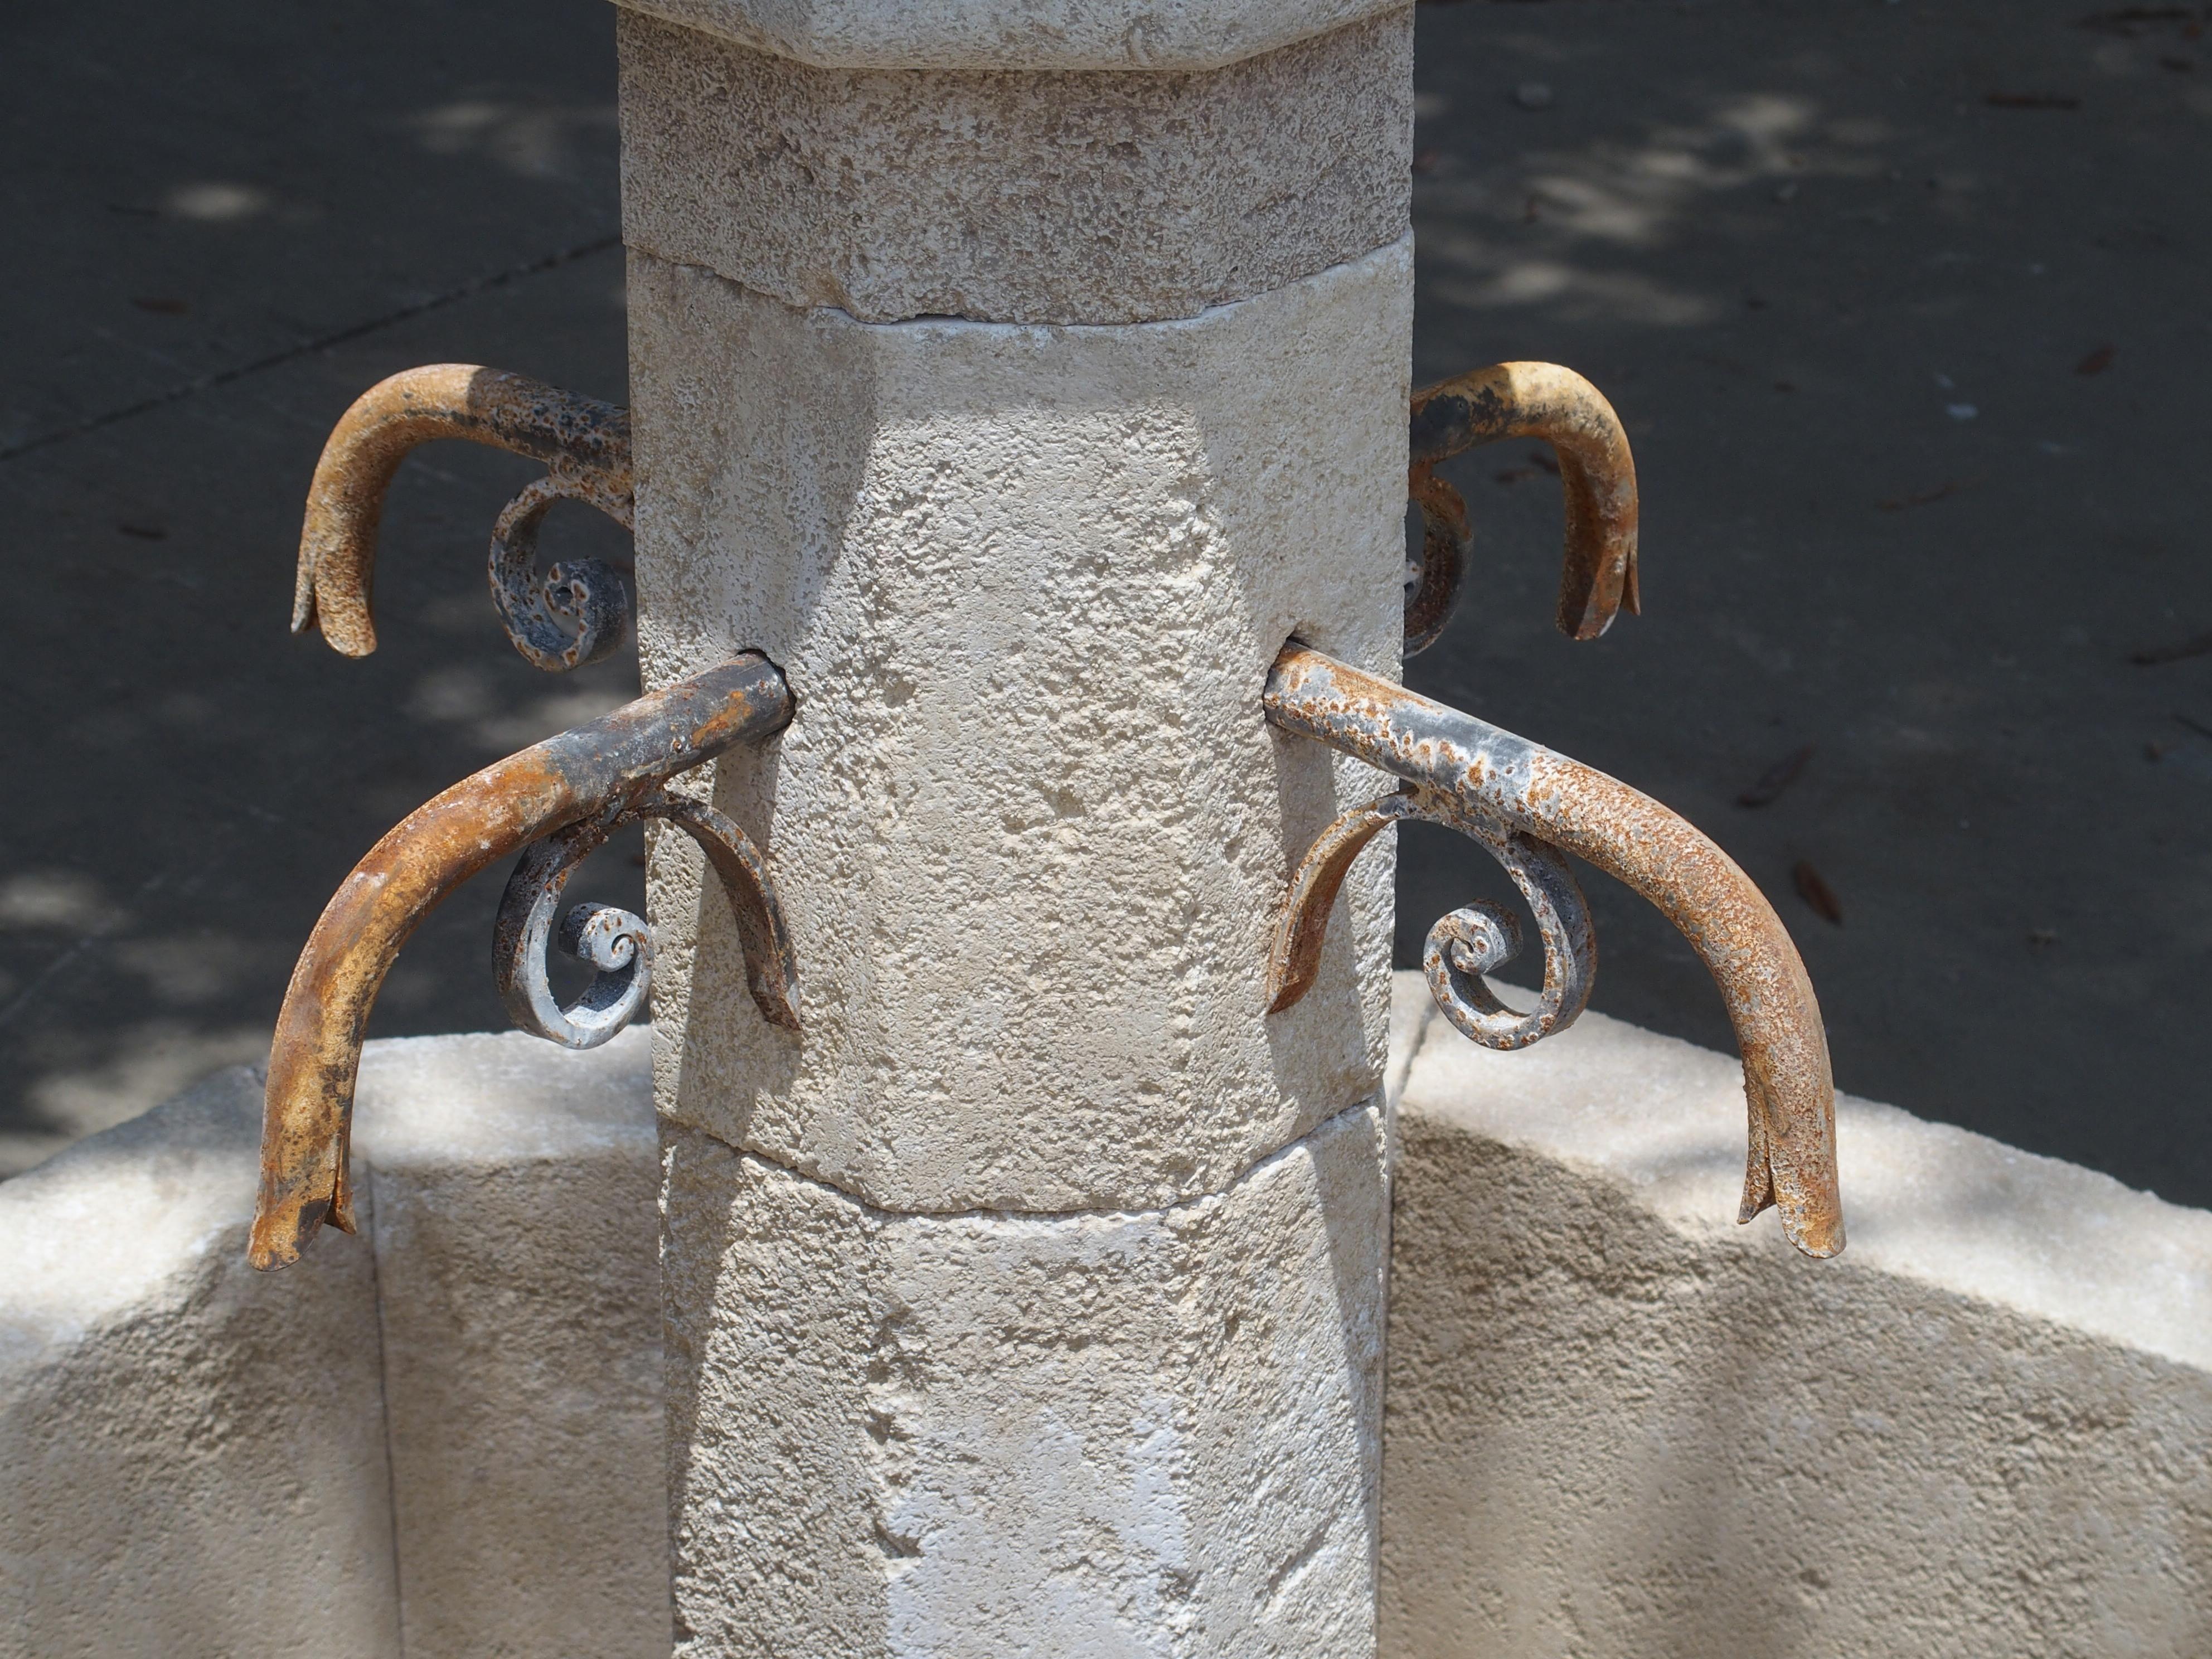 Hand-Carved Small Limestone Center Village Fountain from Provence, France